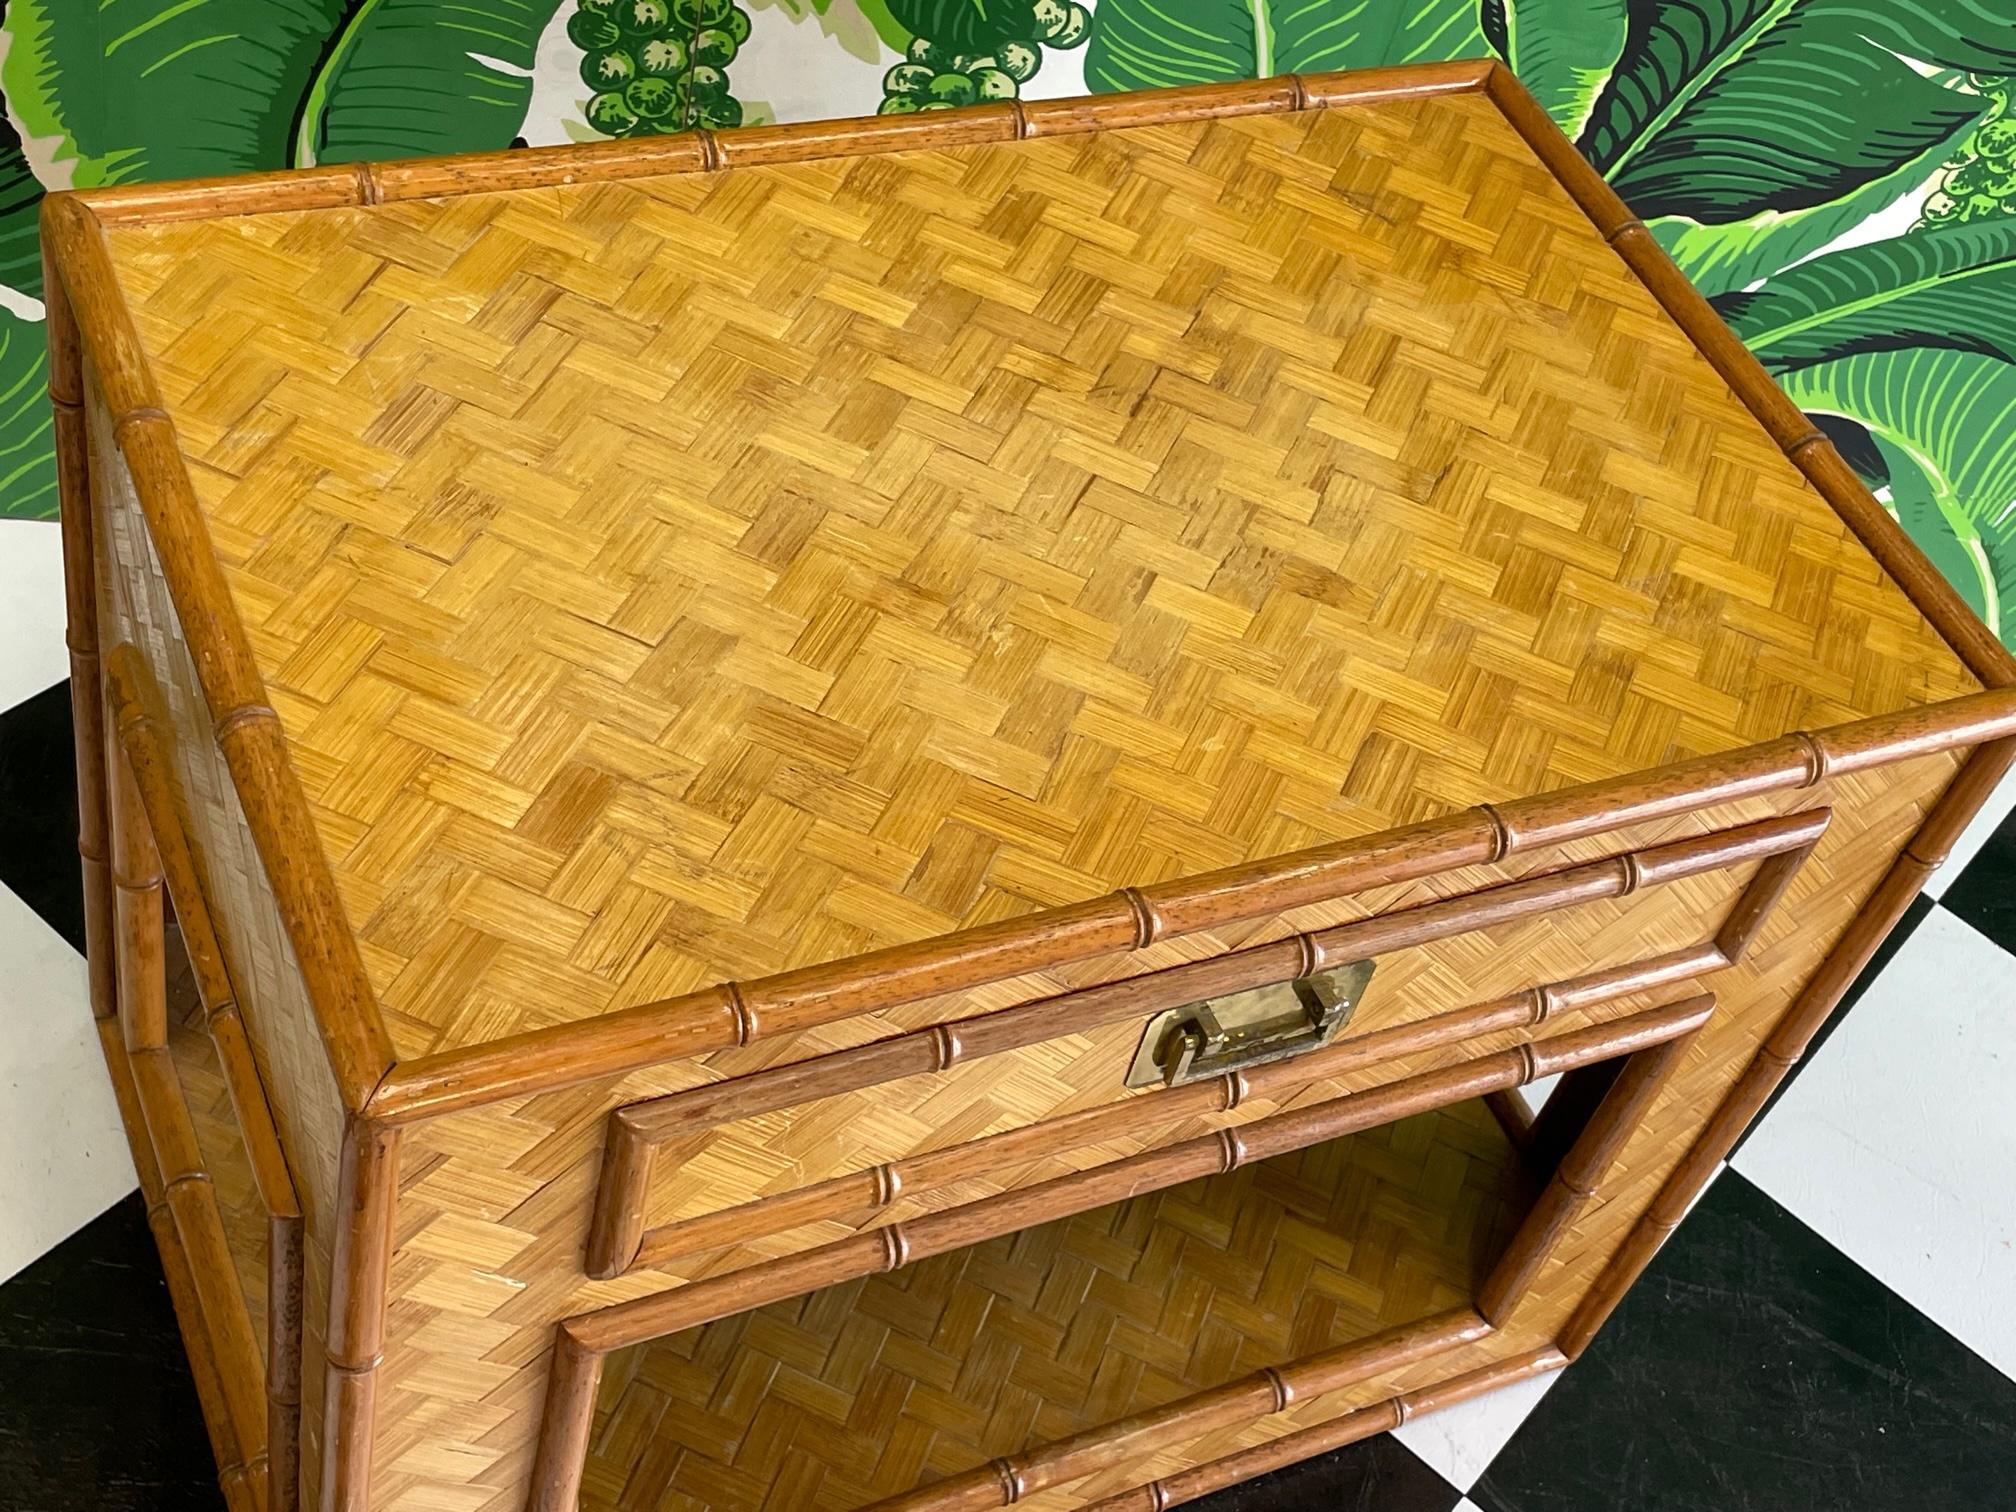 Faux bamboo nightstand with full basketweave cane veneer. Brass campaign style hardware. Good vintage condition with imperfections consistent with age, see photos for condition details.
For a shipping quote to your exact zip code, please message us.
